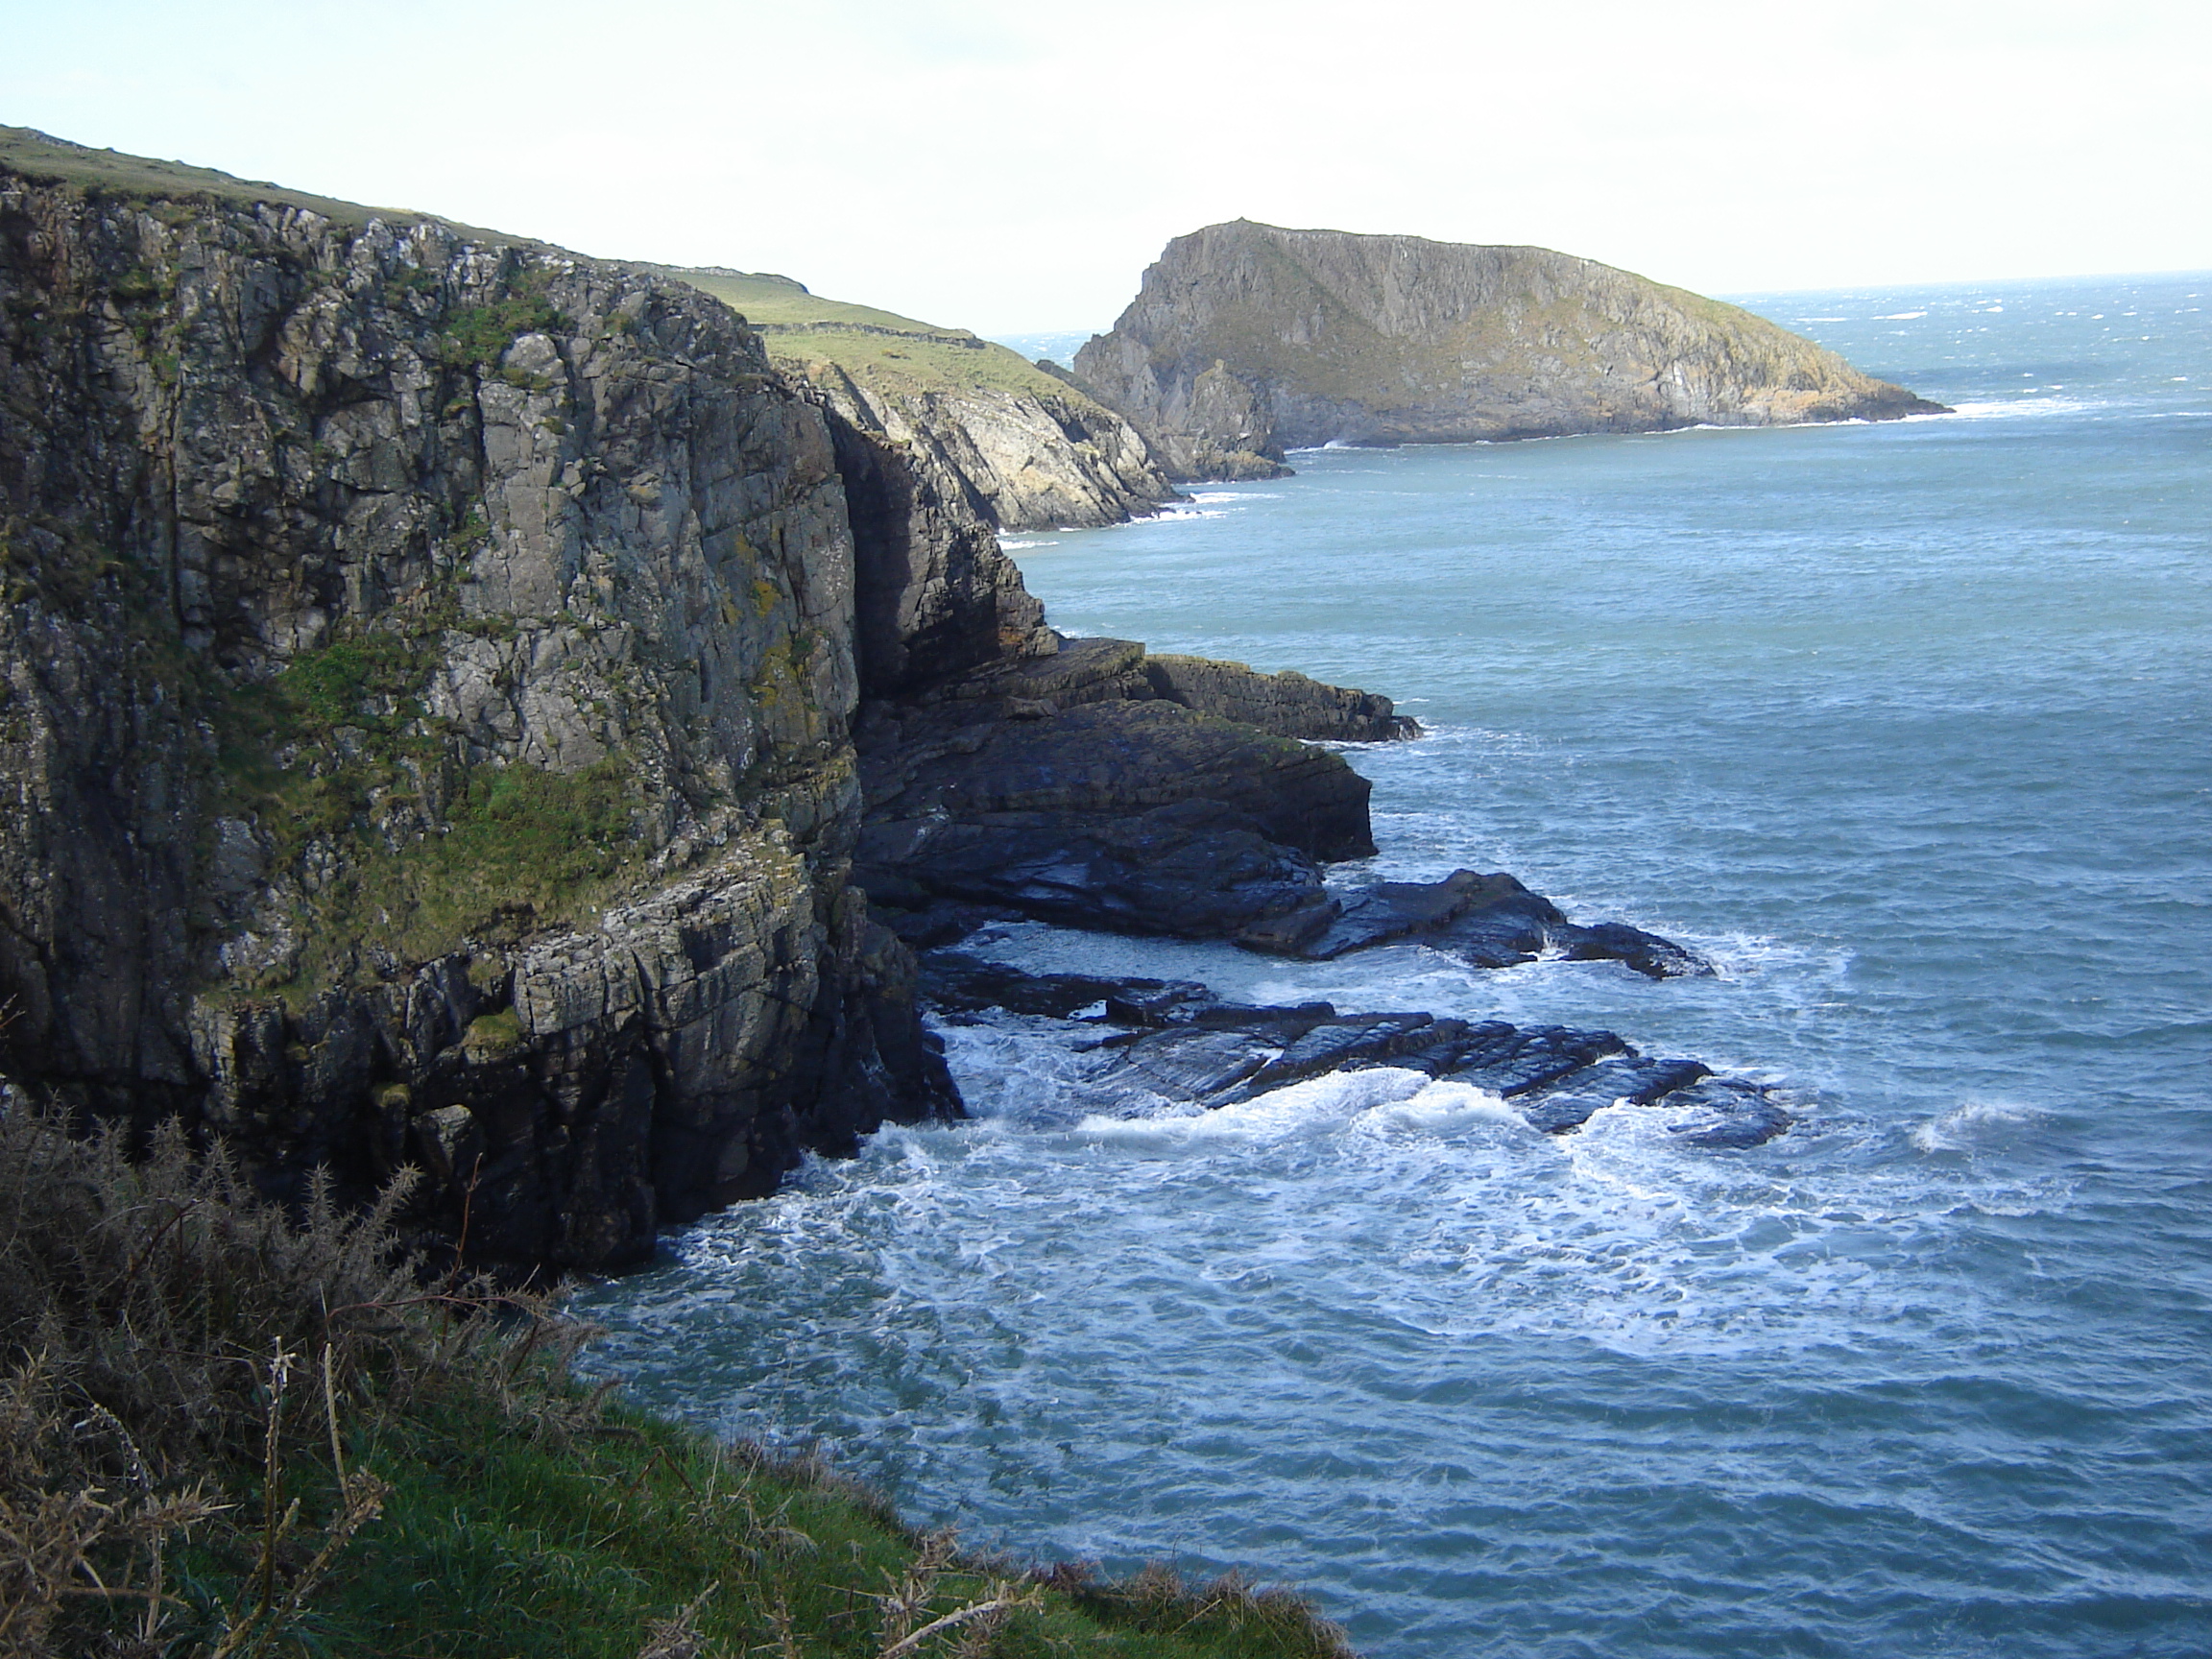 The wreck site looking NW away from Abercastle